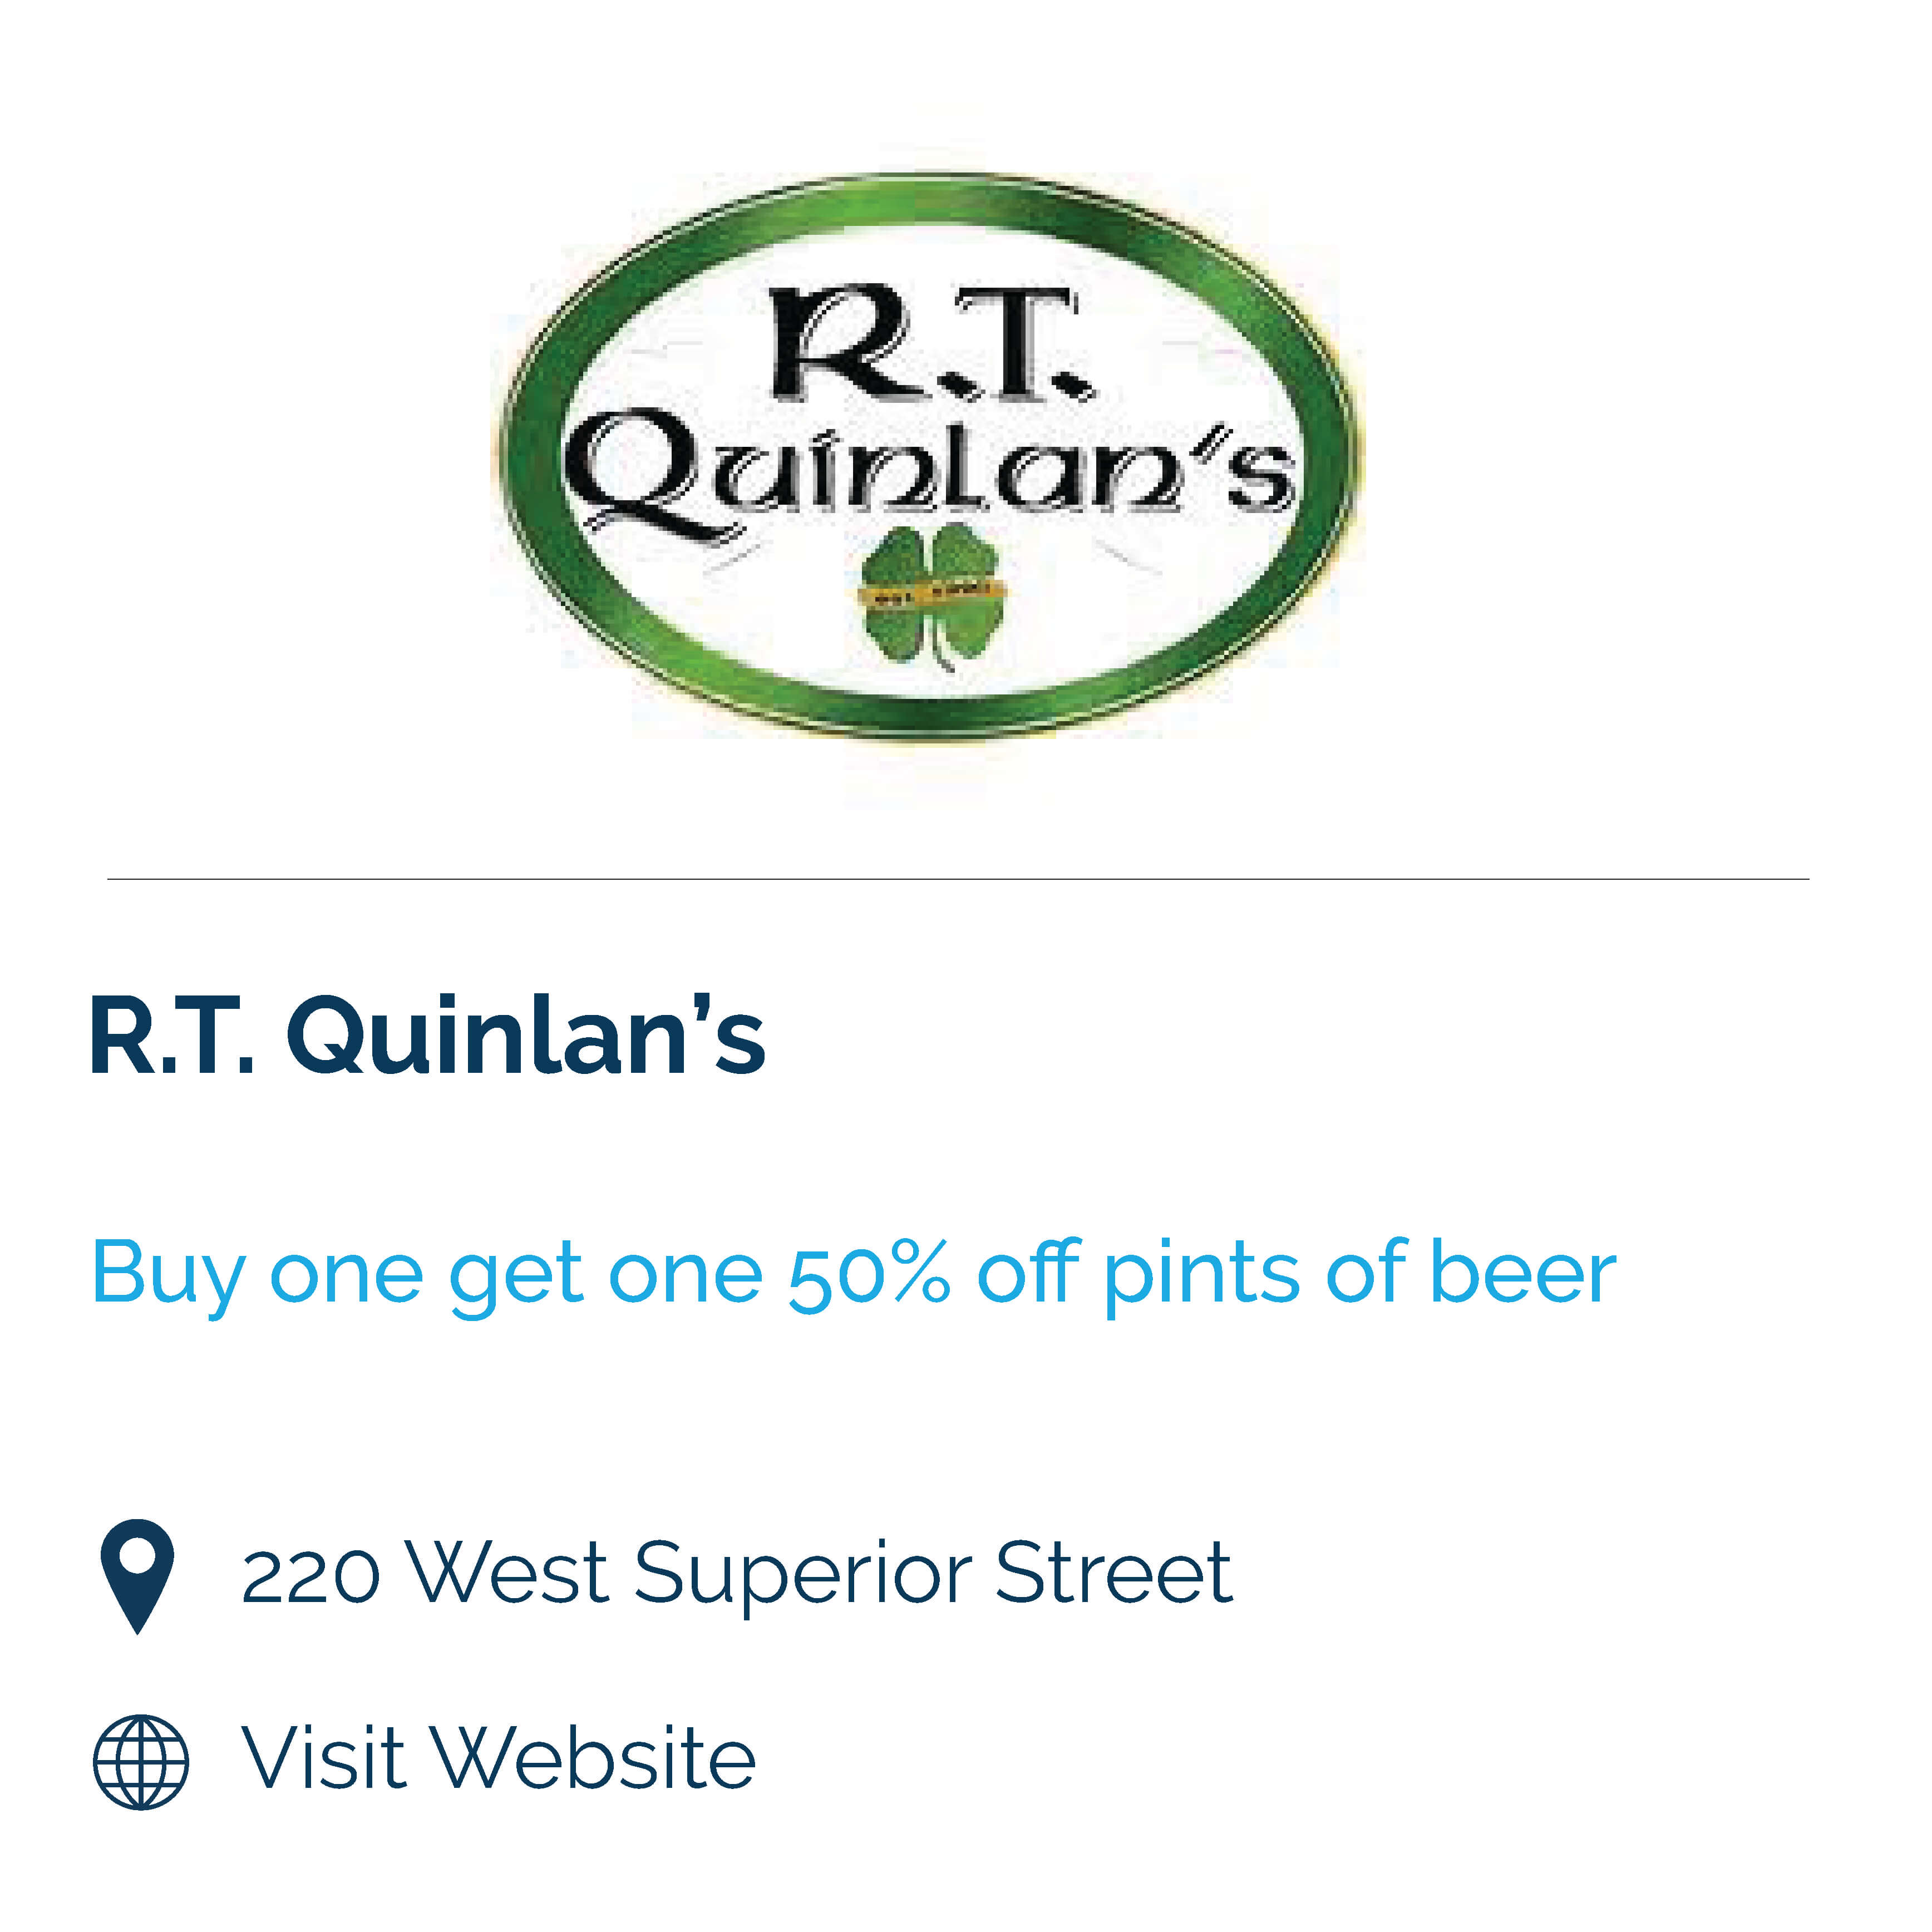 r.t. quinlan's. buy one get one 50% off pints of beer. 202 west superior street